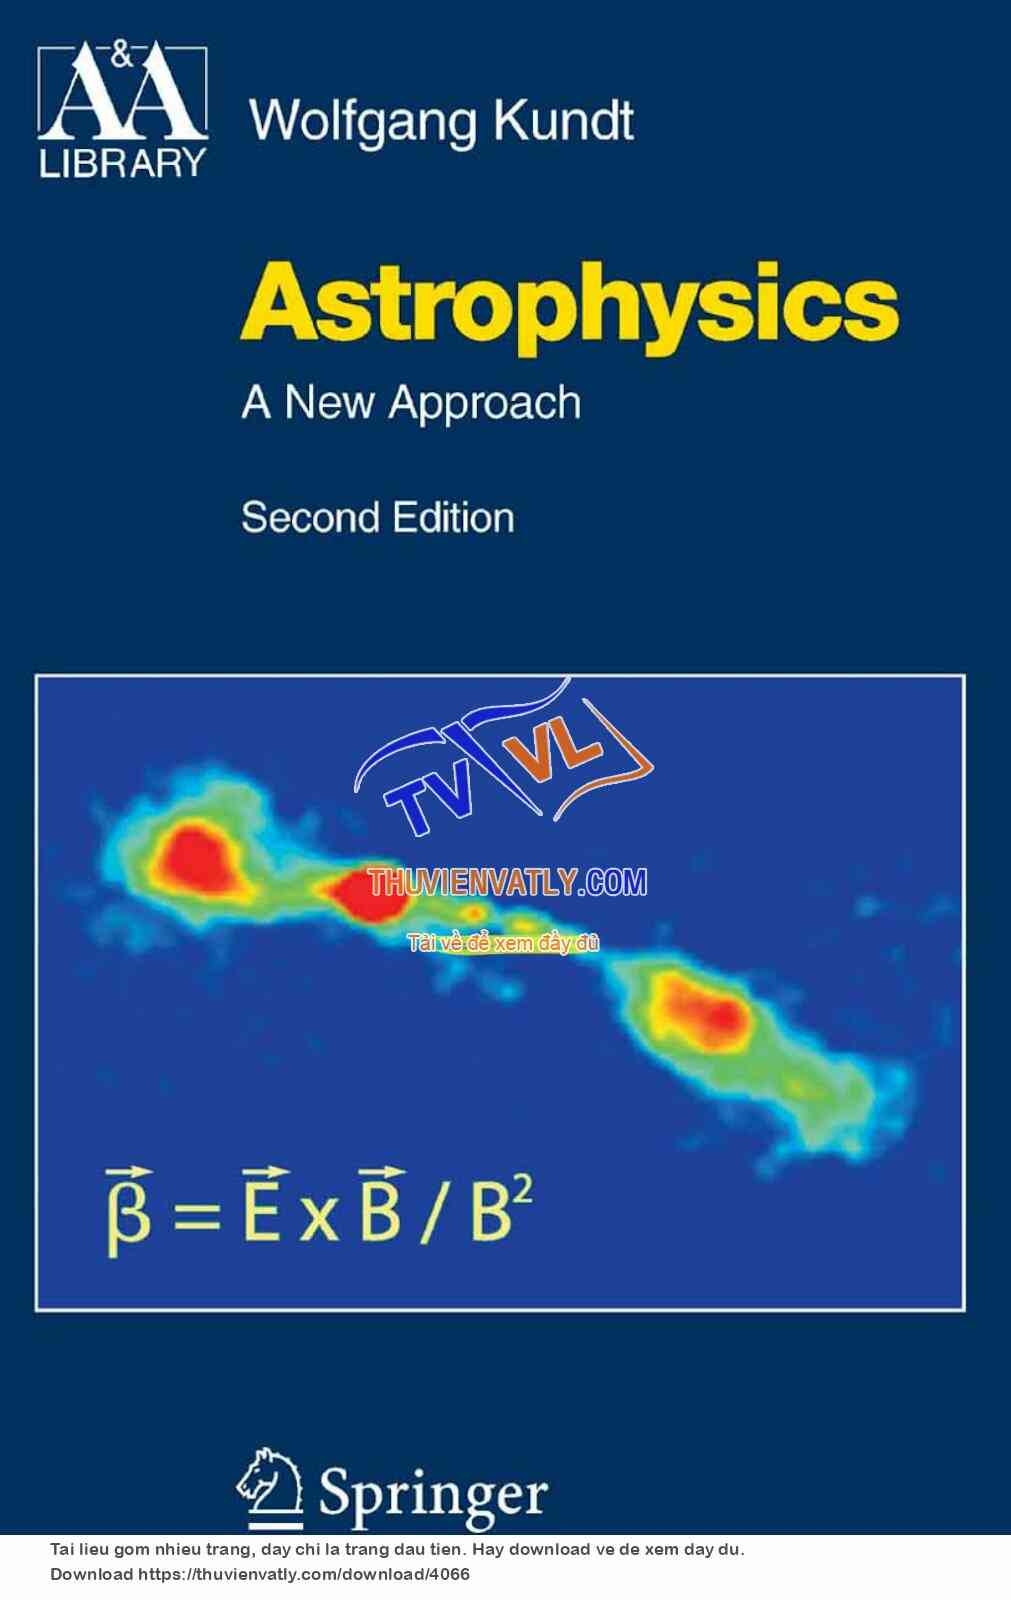 Astrophysics - A New Approach (Wolfgang Kundt)